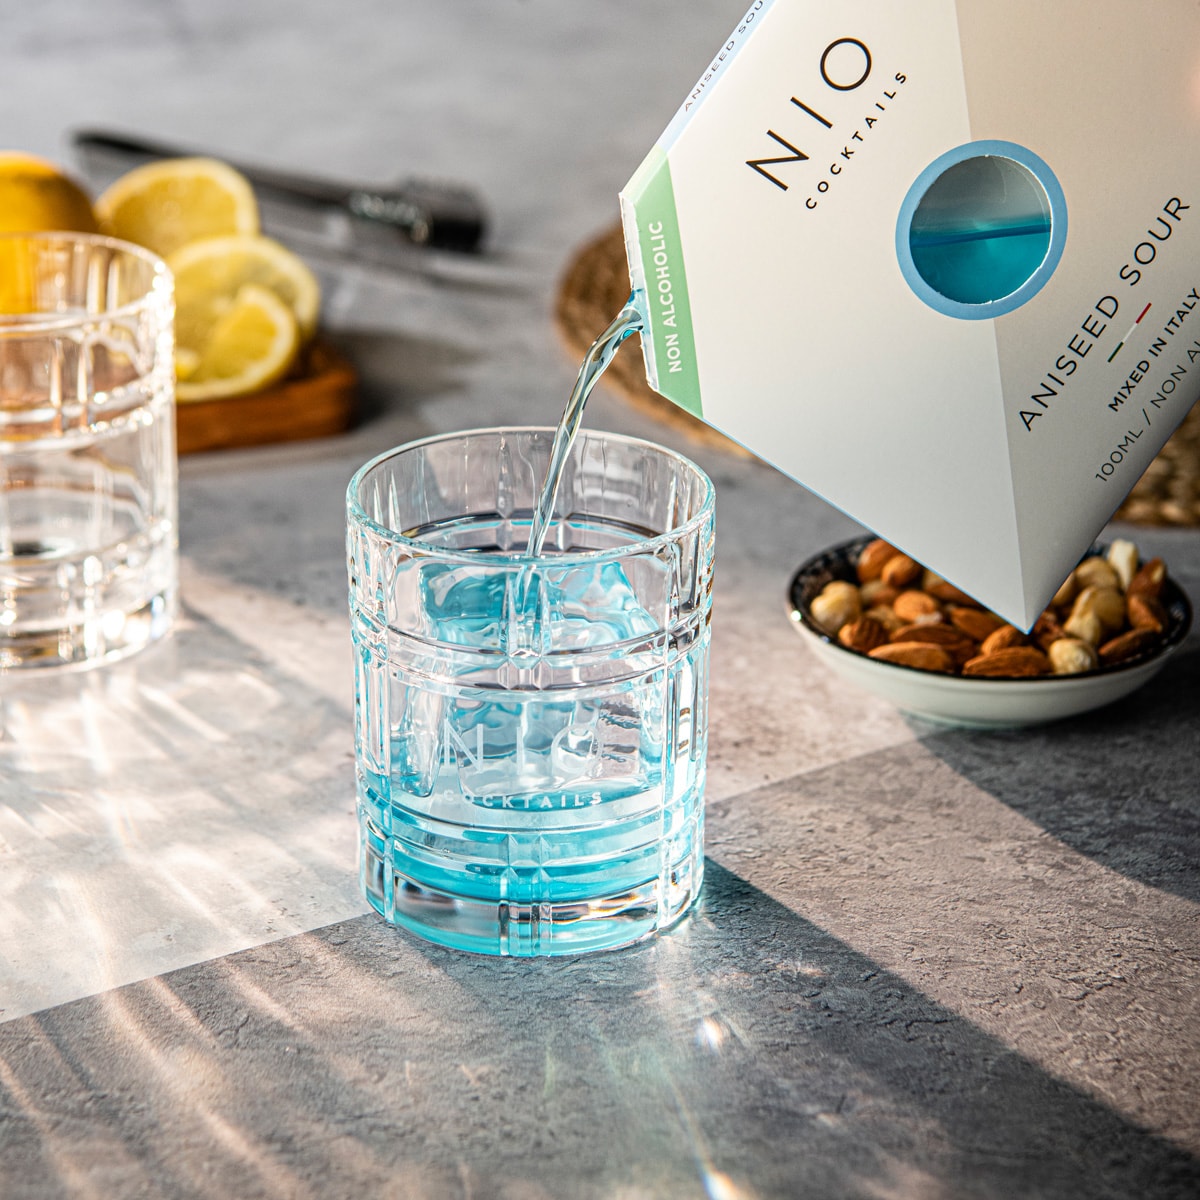 Nio Cocktails - The Famous Four Cocktail Box Ready to Drink 4x100ml